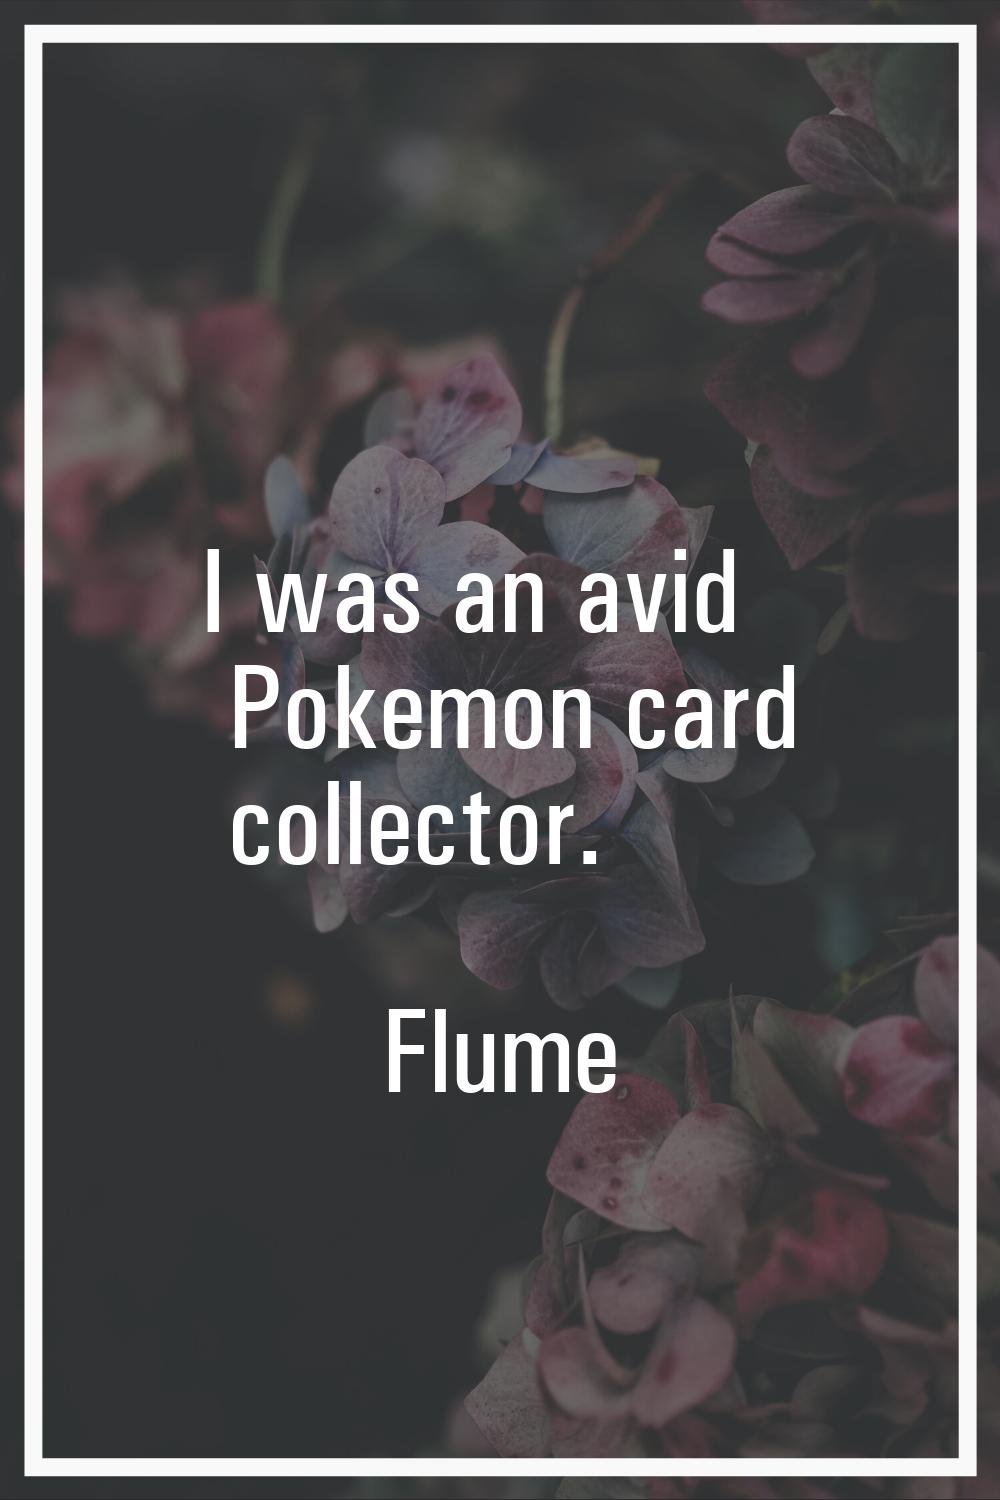 I was an avid Pokemon card collector.